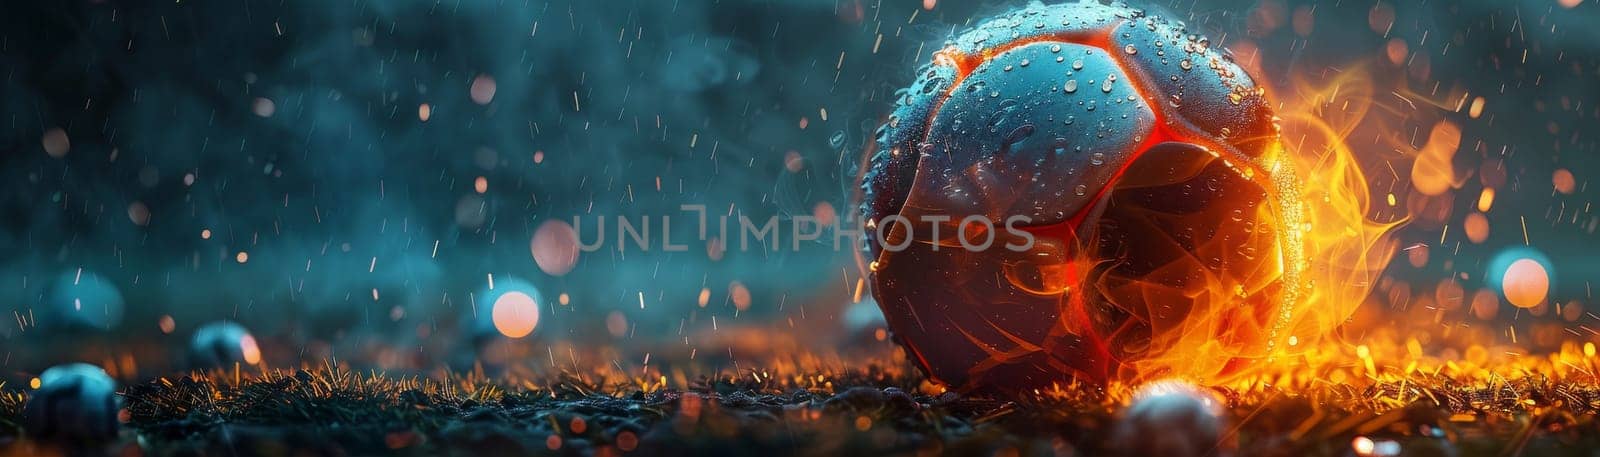 A soccer ball is on a field with a lot of rain. The ball is surrounded by a lot of small, shiny, round objects